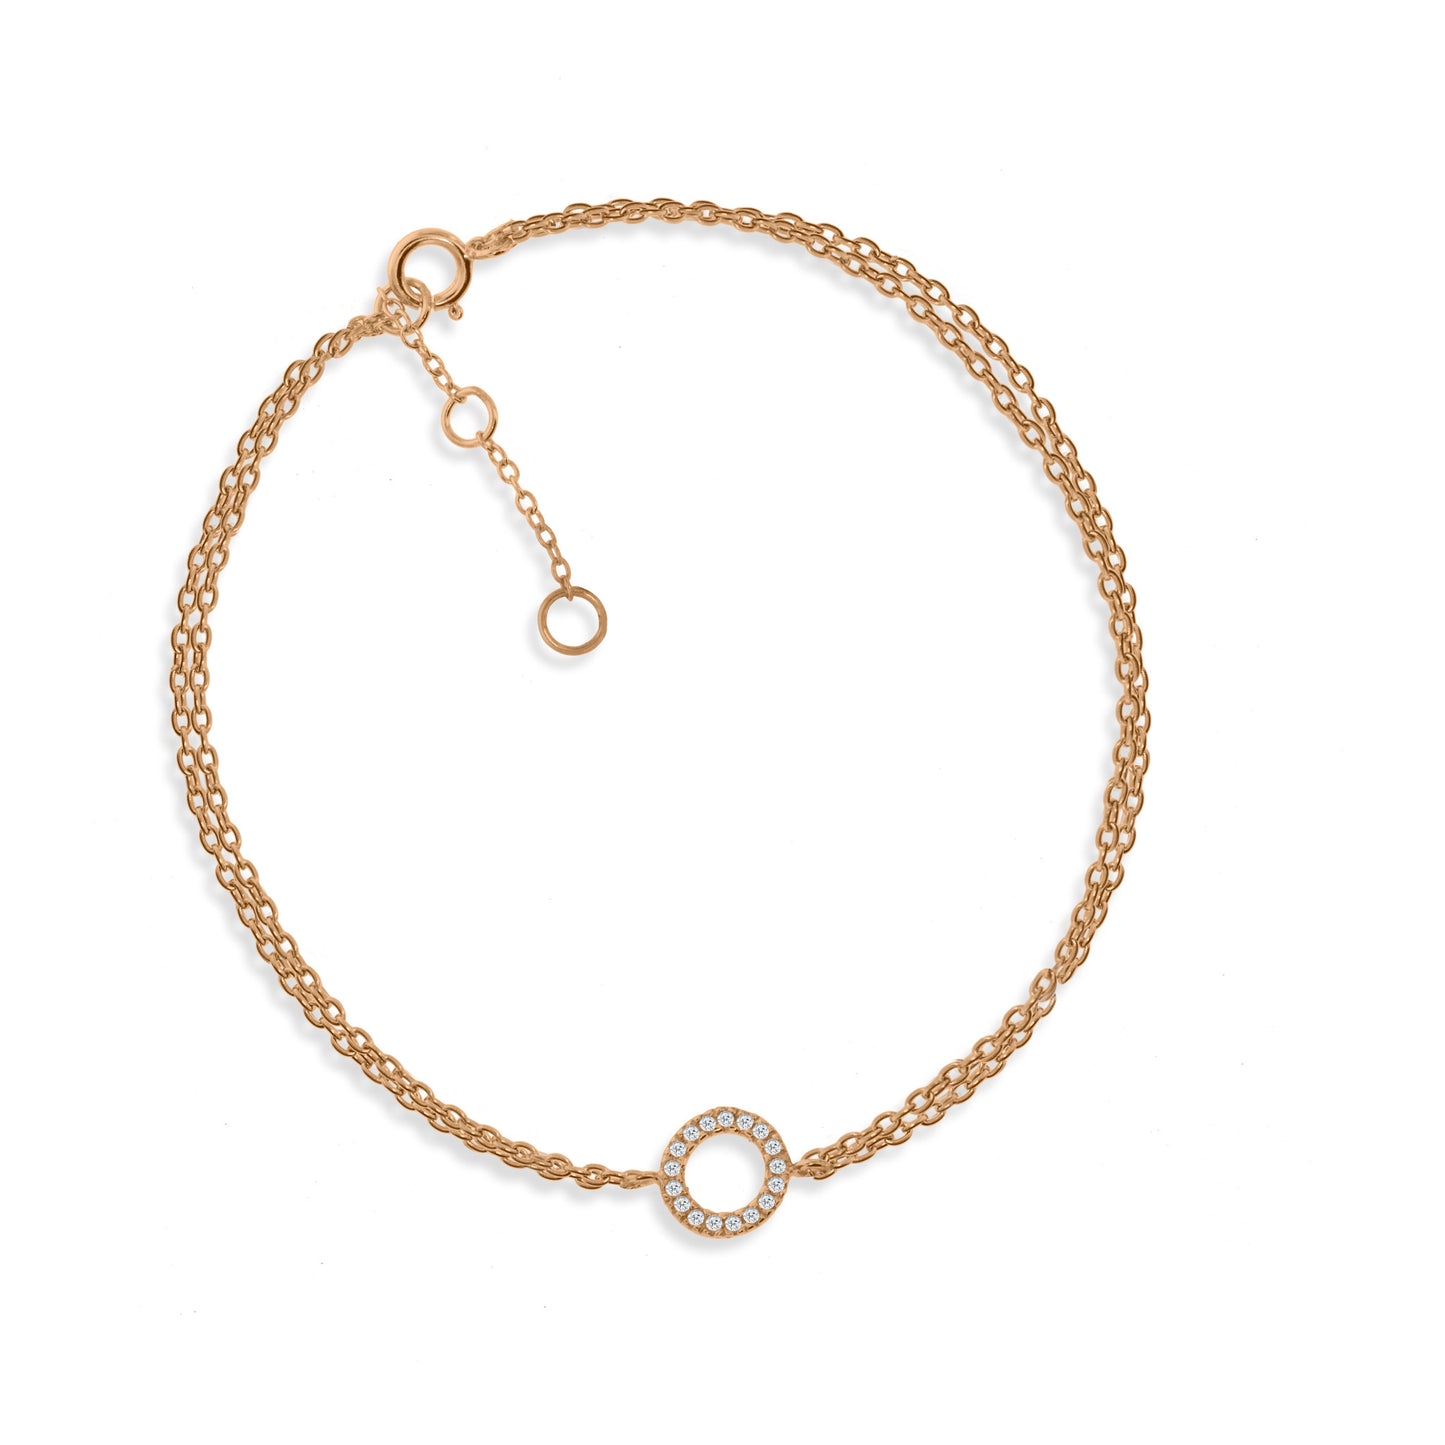 BG-56/R - Double Chain Bracelet with Small Circle Charm